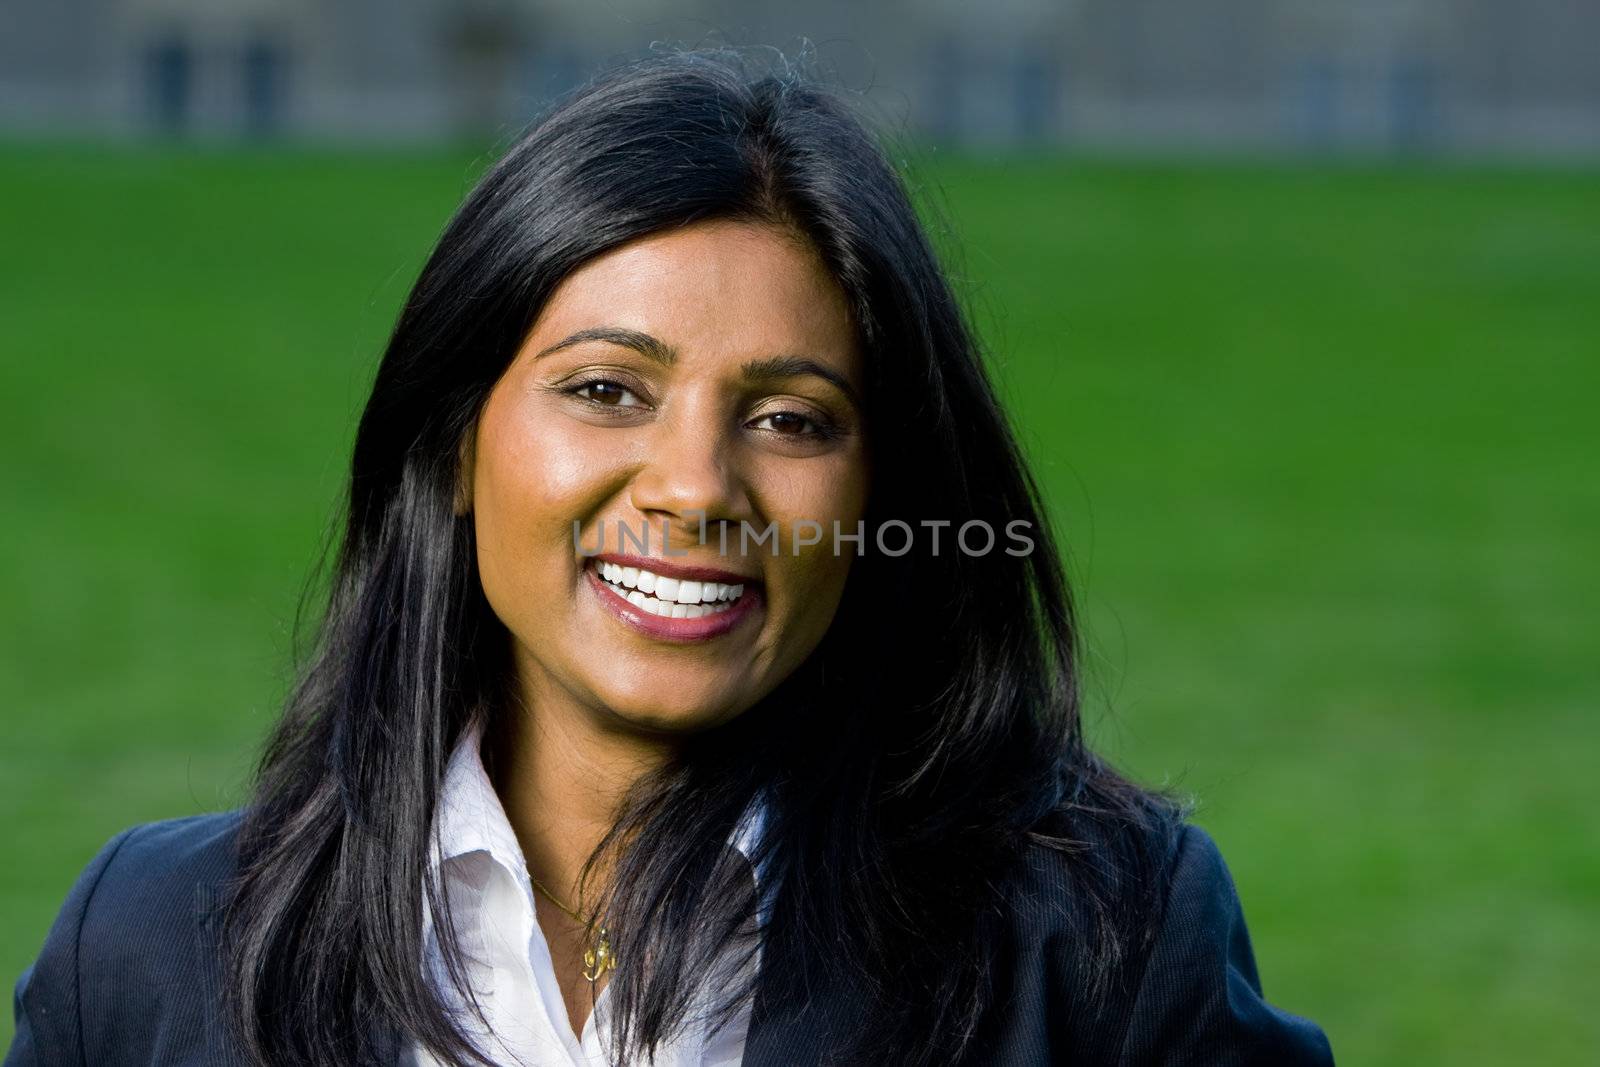 Beautiful indian girl smiling outdoors at the park with green grass